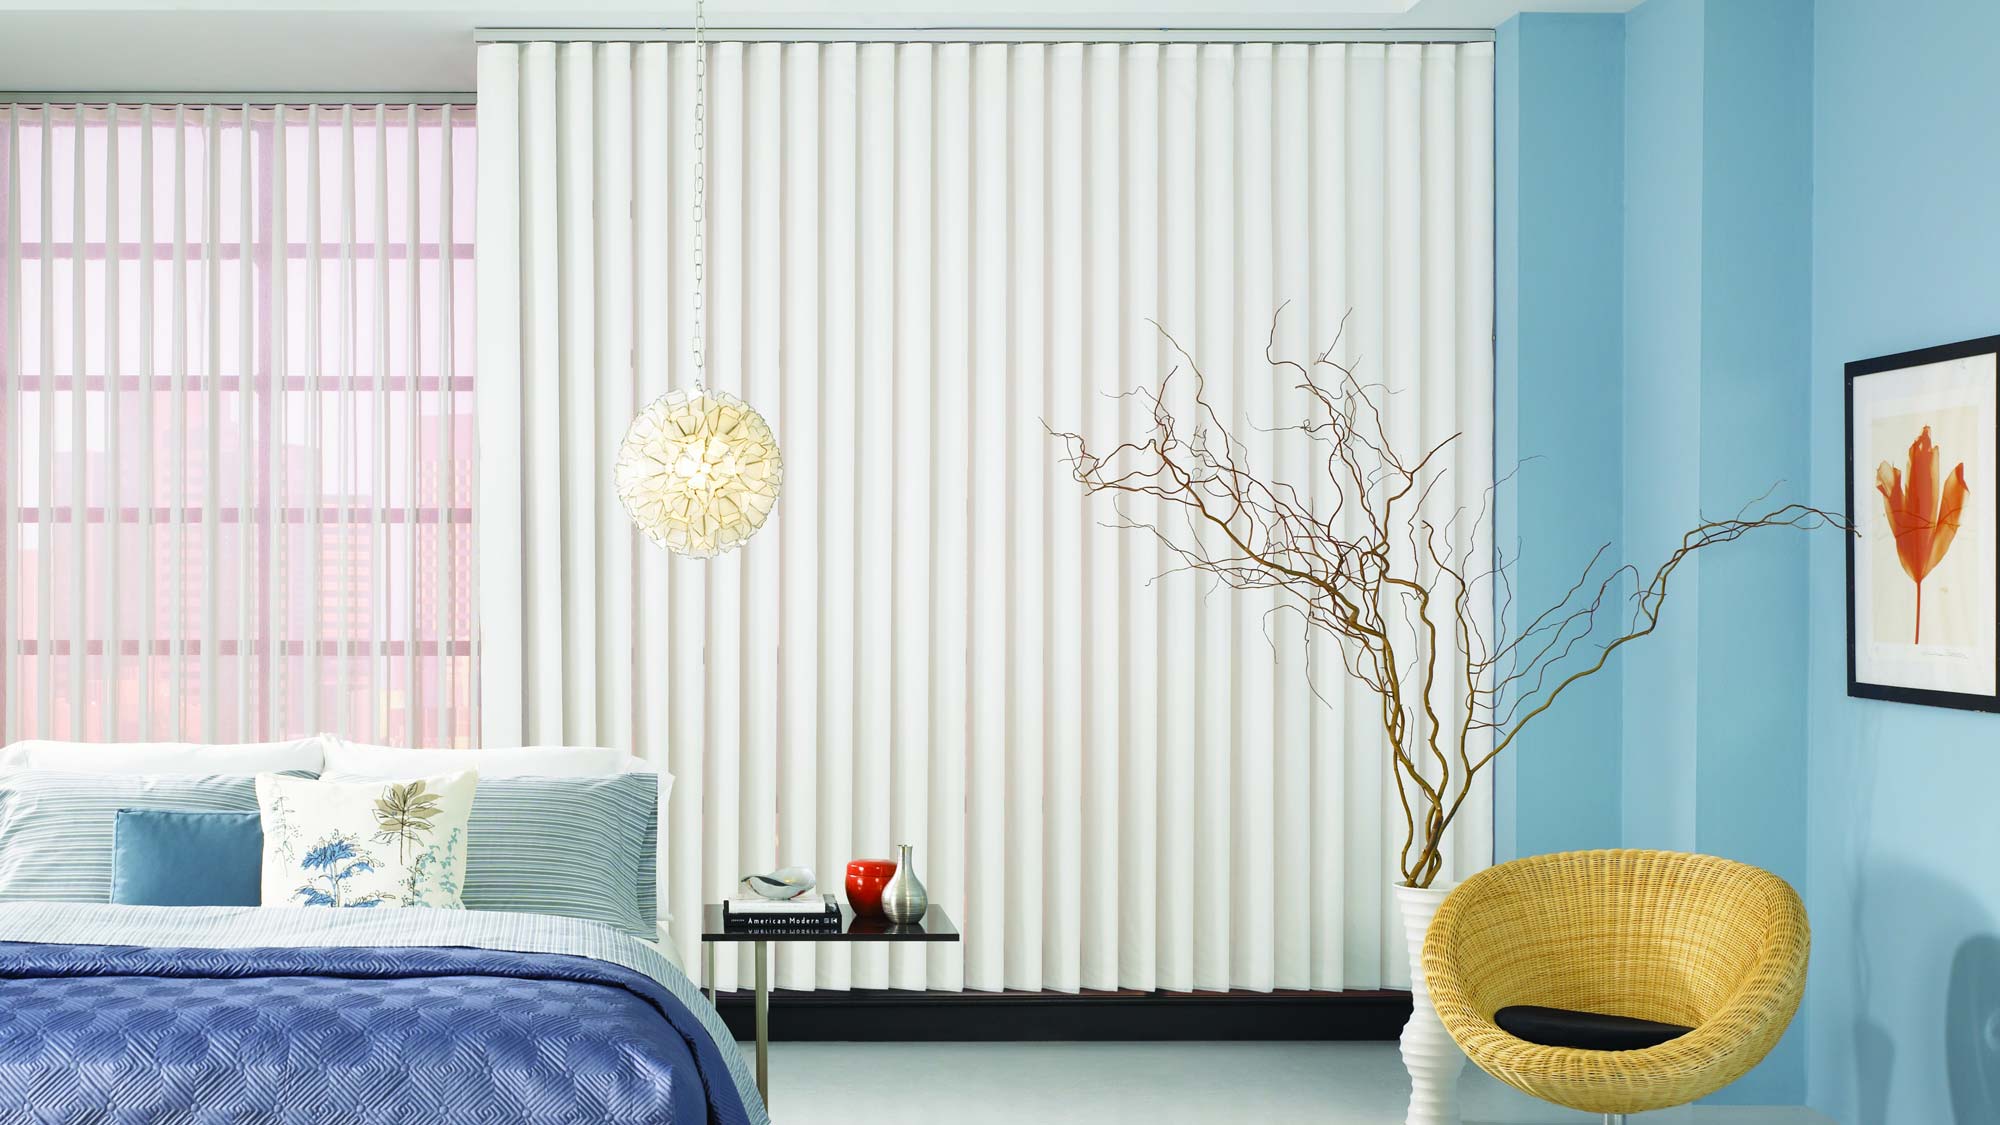 Vertical blinds and sheer fabric wrapped vertical blinds cover a large window in a room with blue walls and bedding.